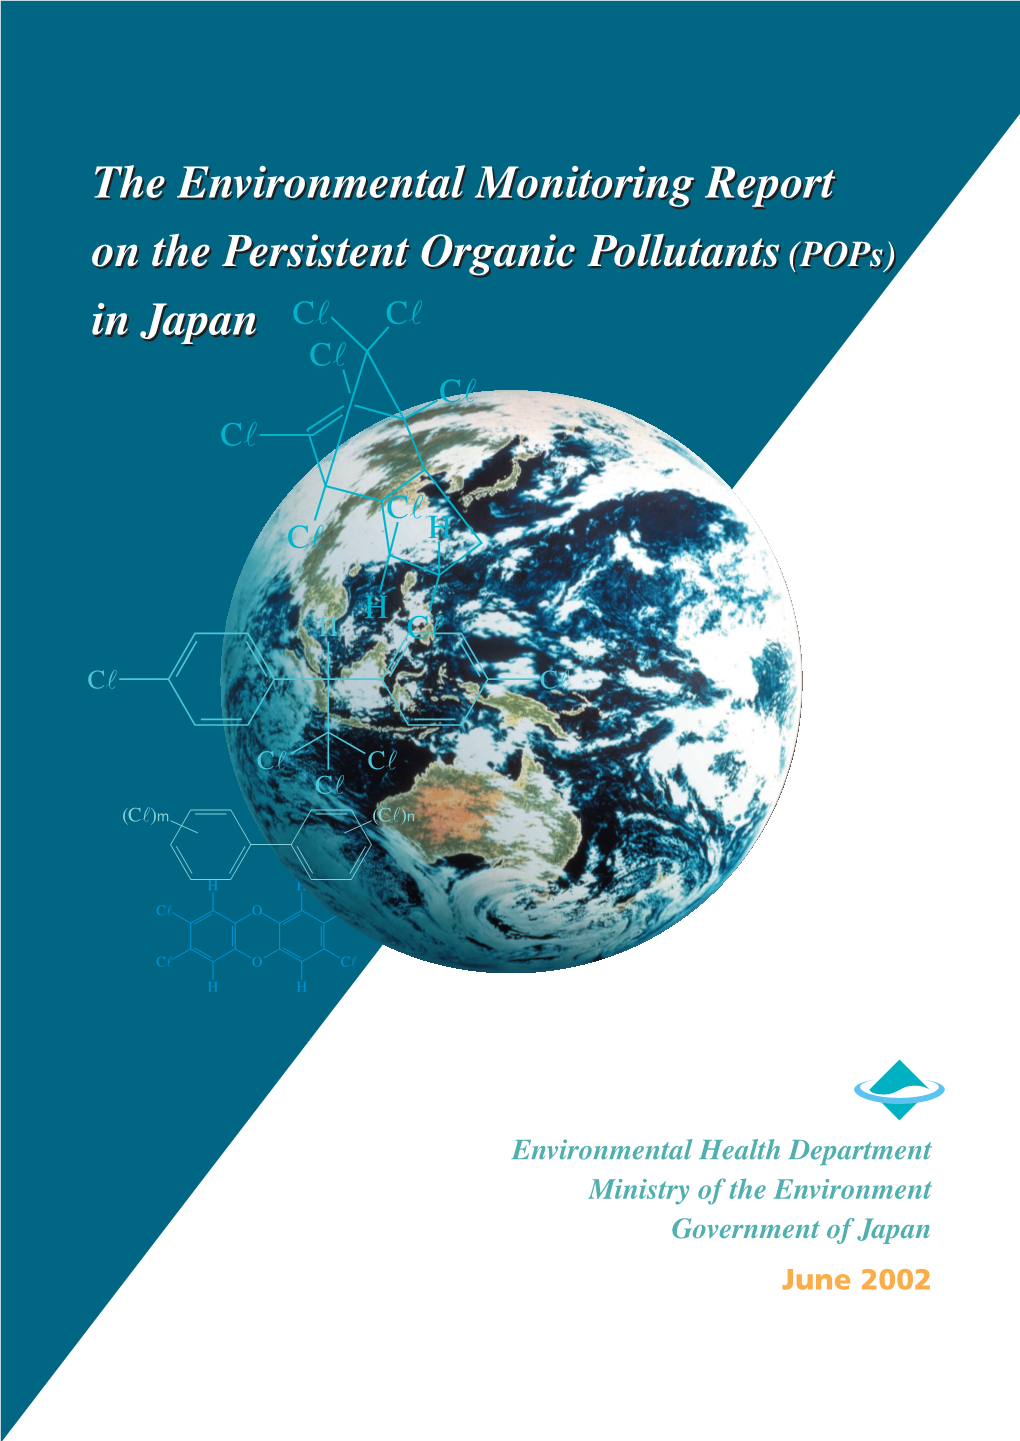 The Environmental Monitoring Report on the Persistent Organic Pollutants (Pops) in Japan